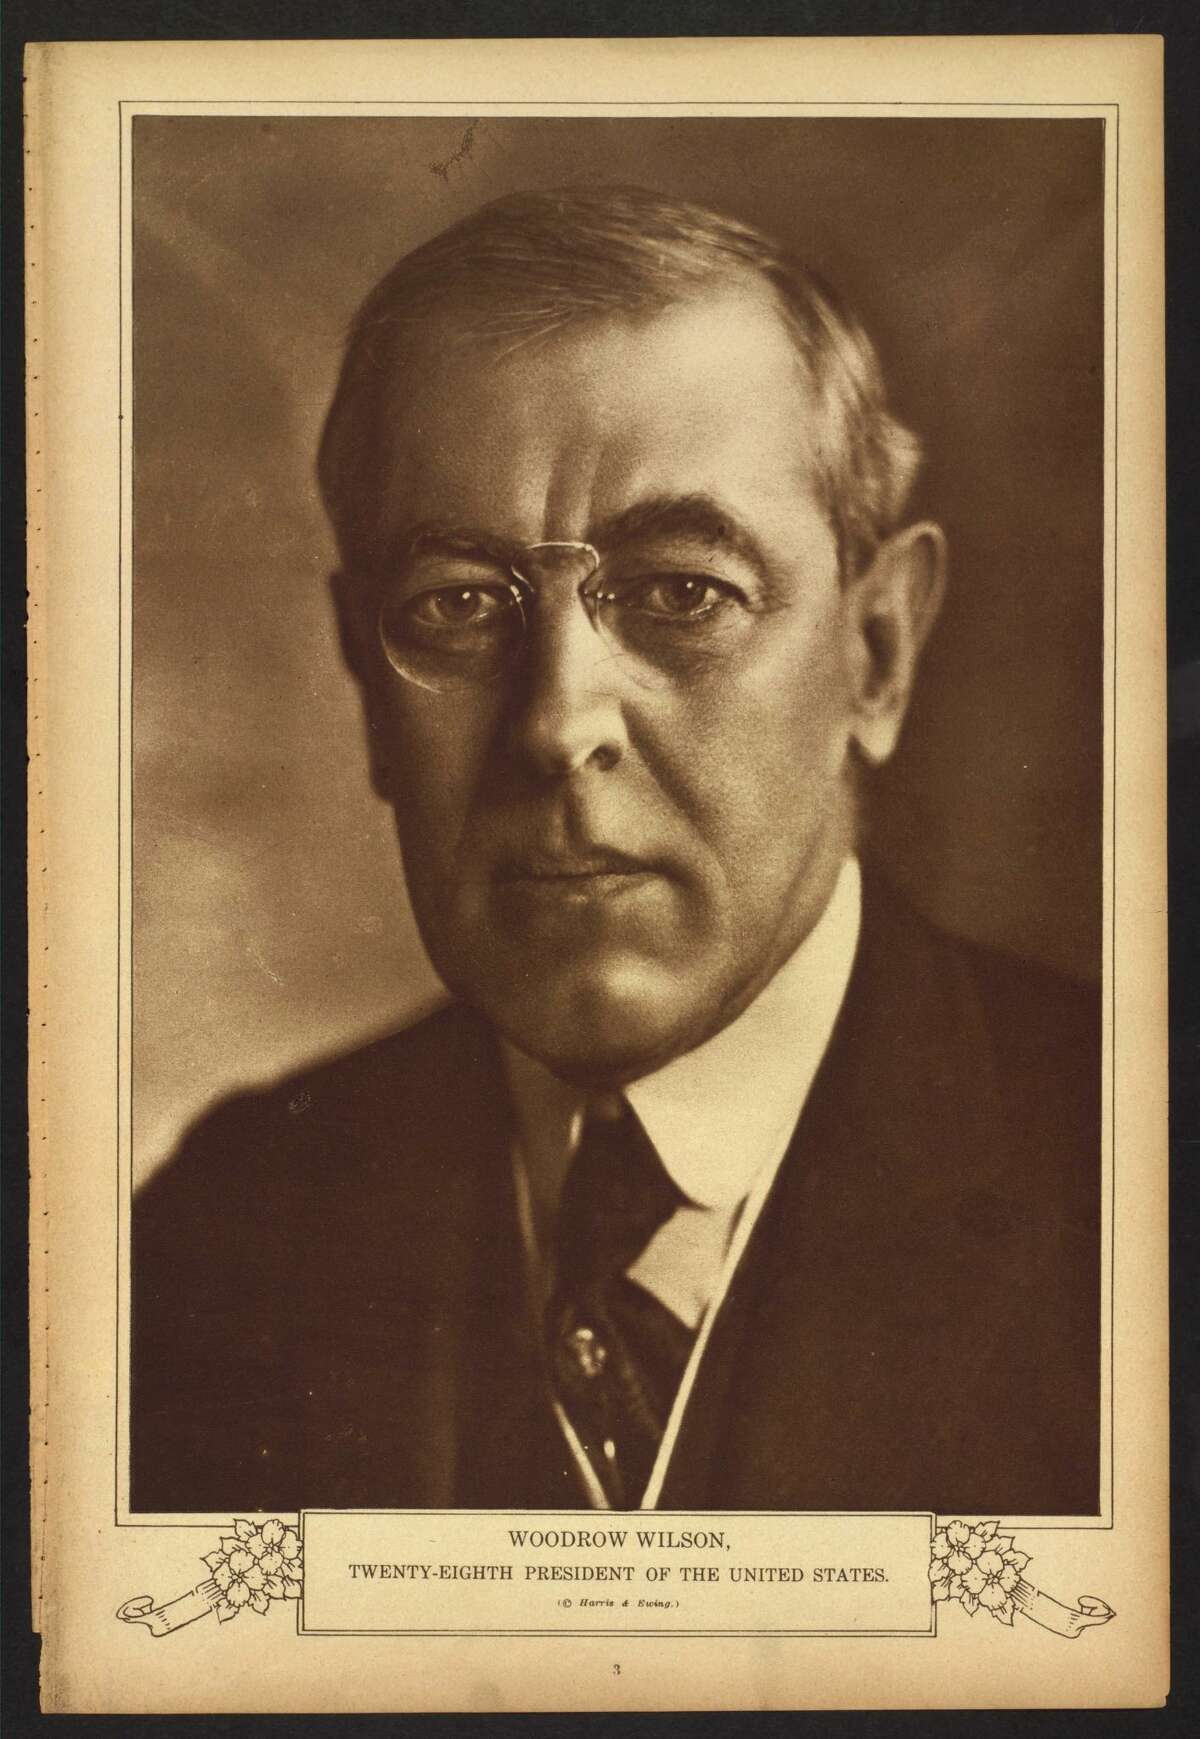 Woodrow Wilson, President of the United States, 1913-1921. Library of Congress notes: "Selected from "The War of the Nations: Portfolio in Rotogravure Etchings," published by the New York Times shortly after the 1919 armistice."